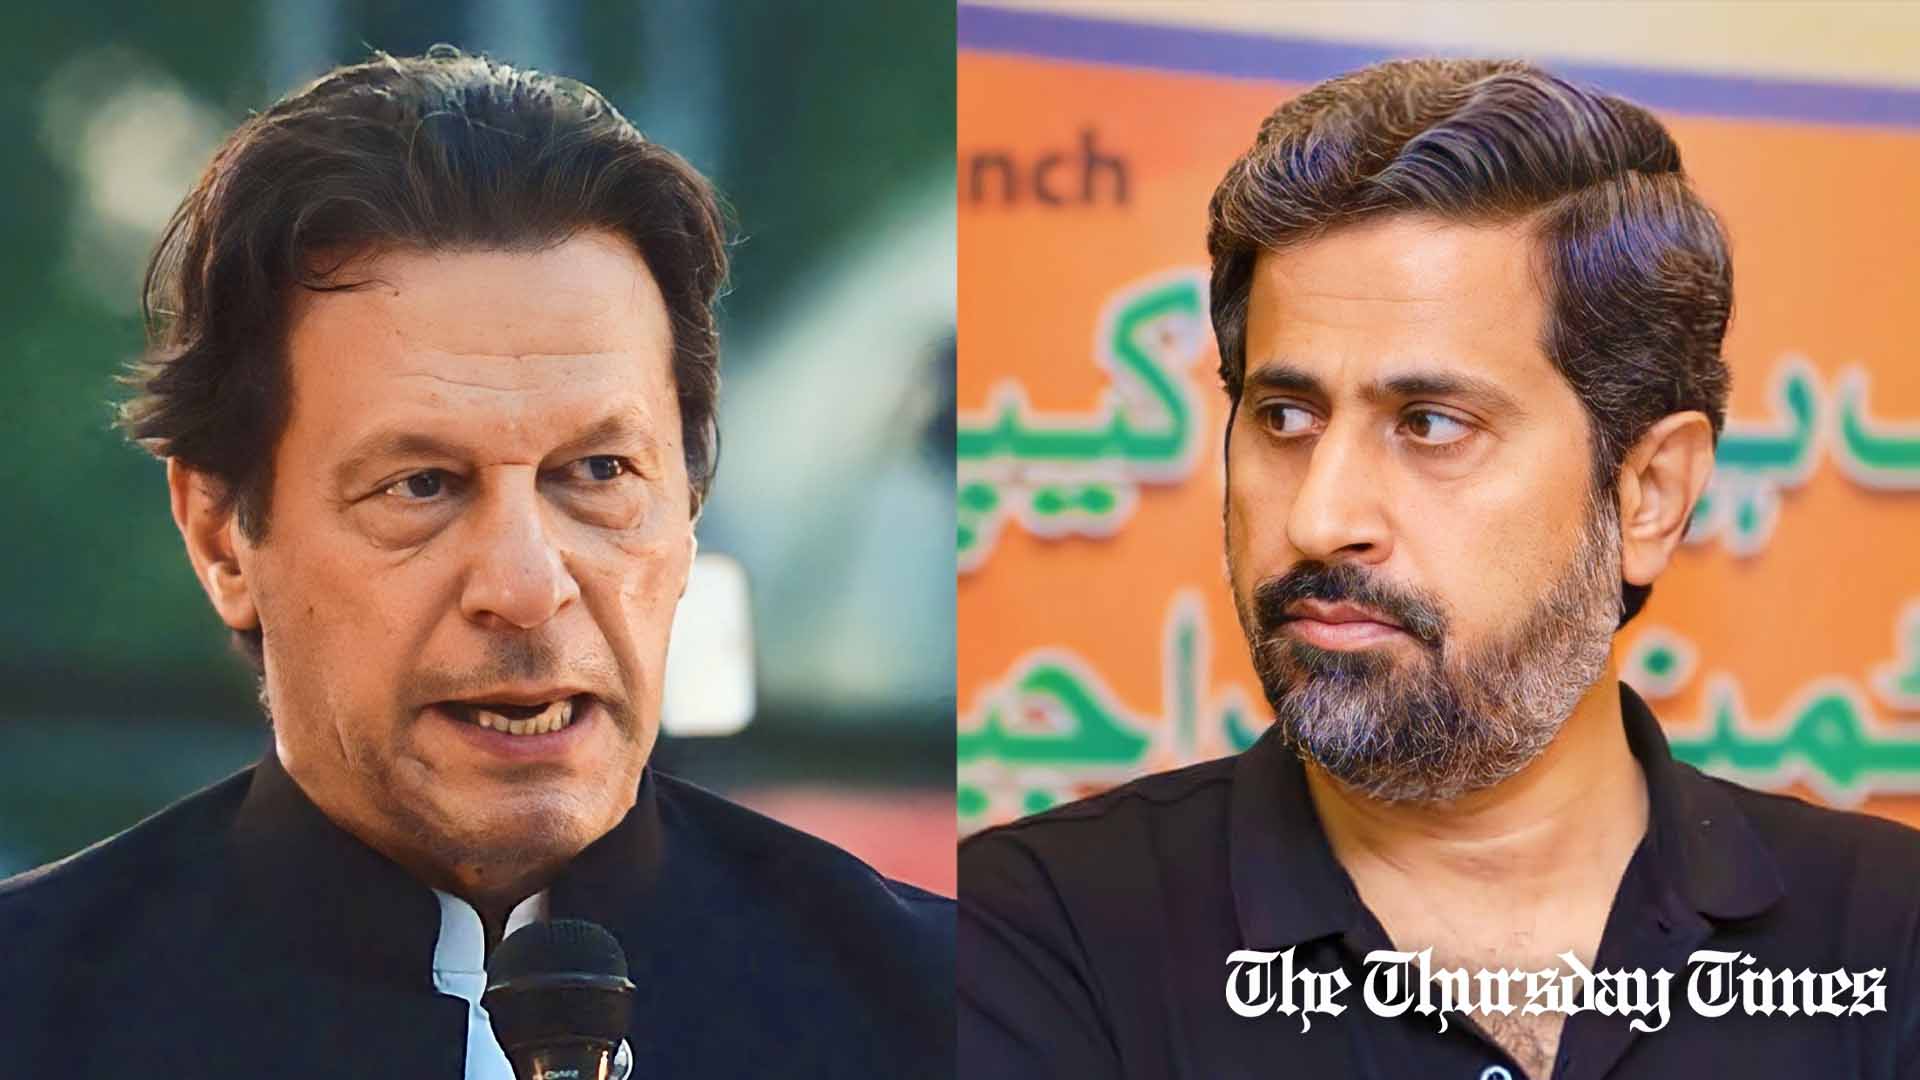 A combined file photo is shown of PTI chairman Imran Khan (L) and former MPA for the Punjab Fayyaz ul Hassan Chohan (R). — FILE/THE THURSDAY TIMES